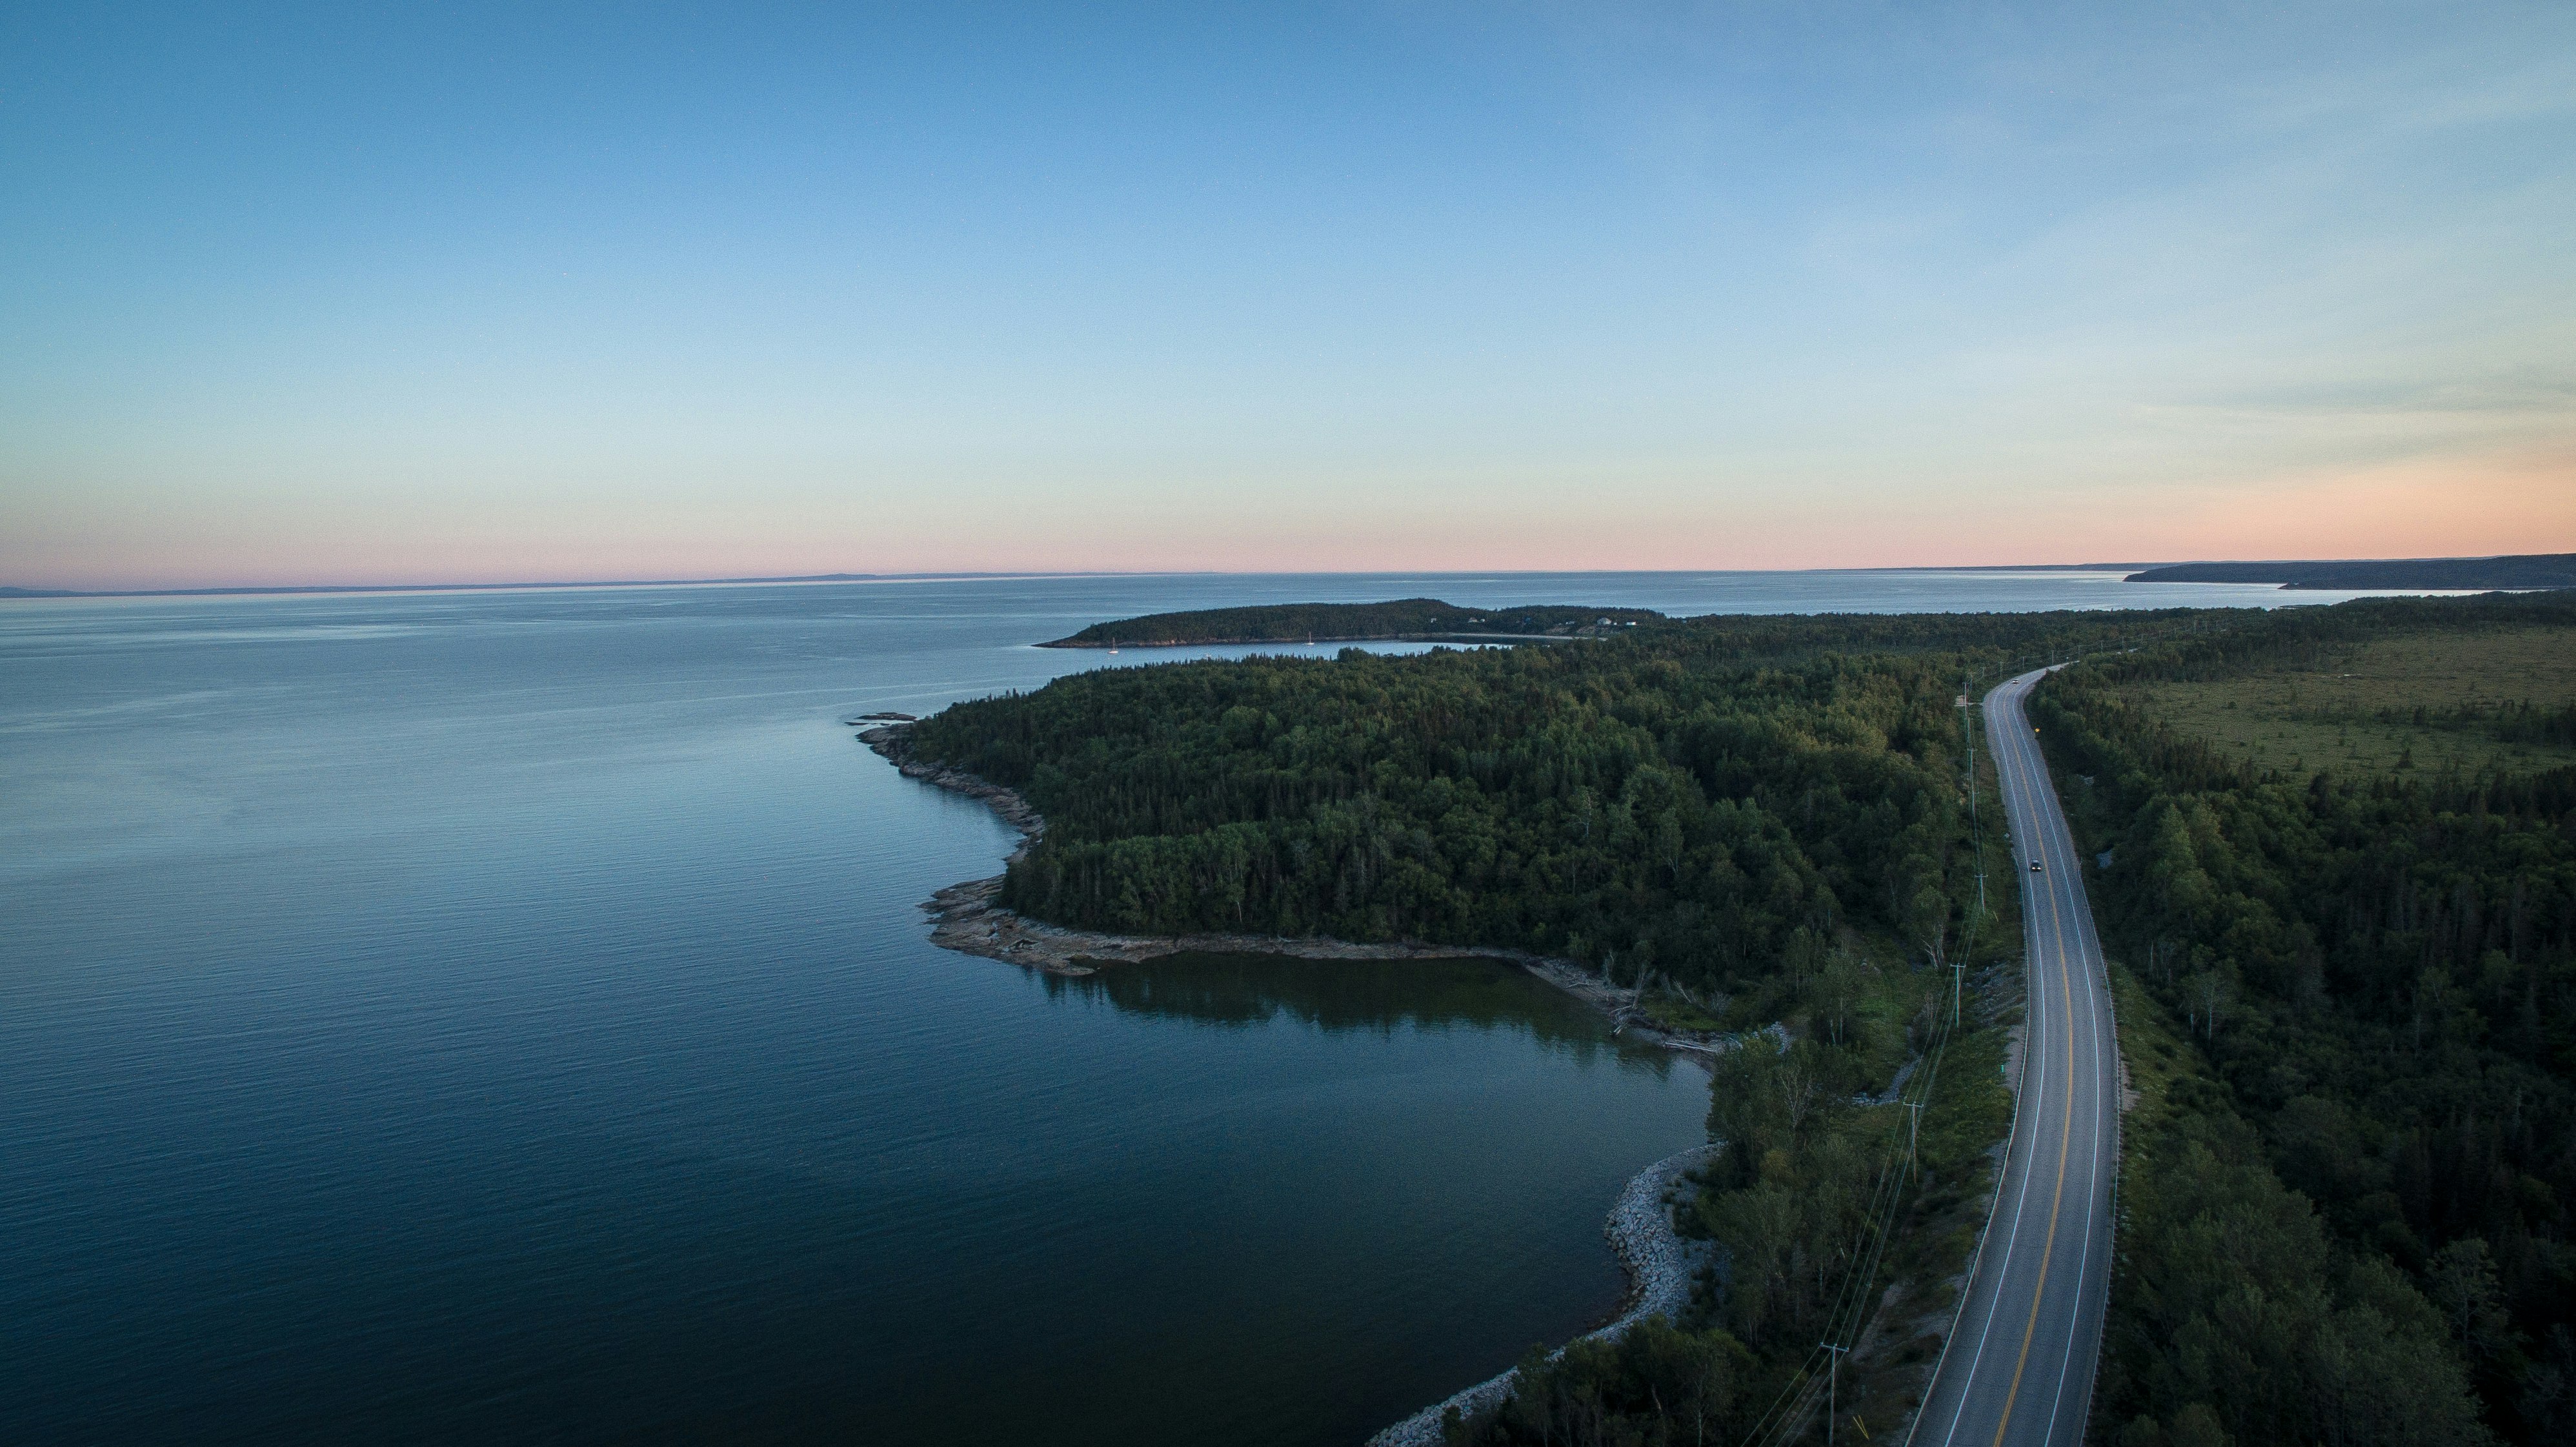 - Part of a 30 days streak of Unsplash uploads -

This photo dates back from my road trip on the North Shore in Québec in 2015.
As we were trying to go as up north as possible for a chance to catch some northern lights, we stopped by a rest area by the road and by the river. 
I had had my DJI Phantom 3 Pro for only a couple of weeks, but was already in love with my new tool. 
The majestic landscapes only got more breathtaking when taken from dozens of feet up in the sky.

Jp Valery is one of the best photographers in Montréal, QC and can be contacted at contact@jpvalery.photo.